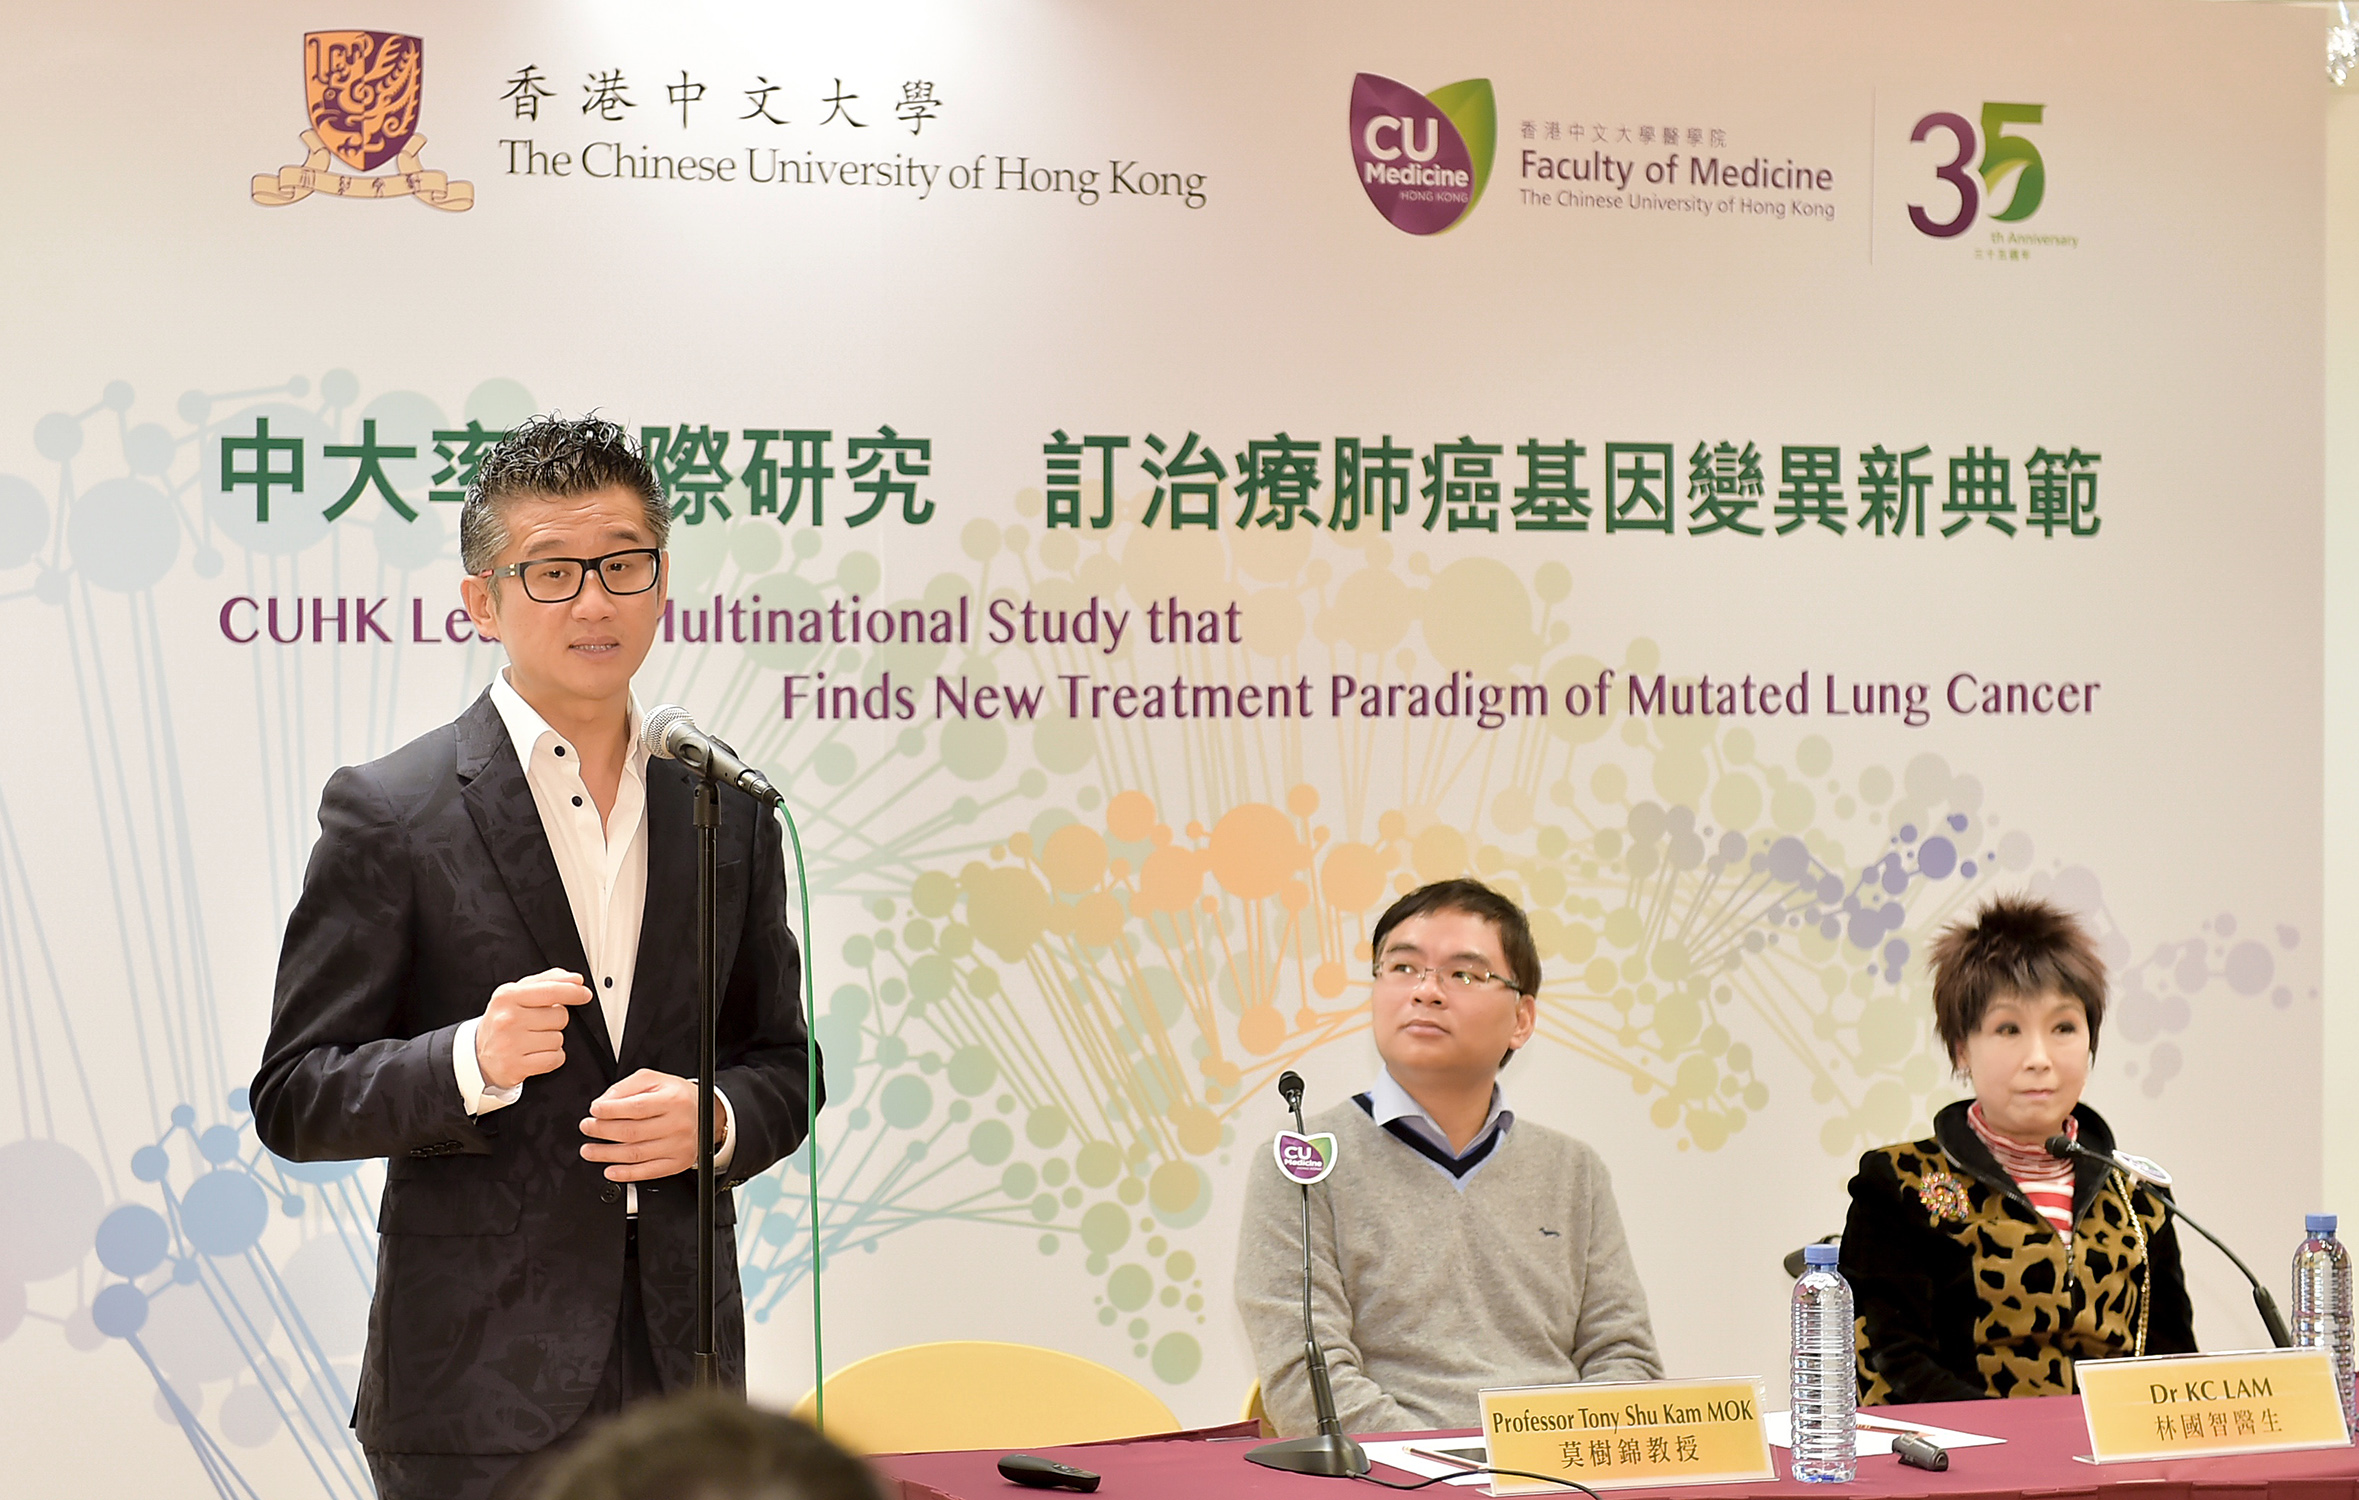 Featured in the picture are Prof. Tony Shu Kam MOK, Li Shu Fan Medical Foundation Professor of Clinical Oncology and Chairman of the Department of Clinical Oncology of the Faculty of Medicine of CUHK (left), Dr LAM Kwok Chi, Clinical Assistant Professor (Honorary), Department of Clinical Oncology, Faculty of Medicine at CUHK (middle) and lung adenocarcinoma patient Madam CHOW (right)